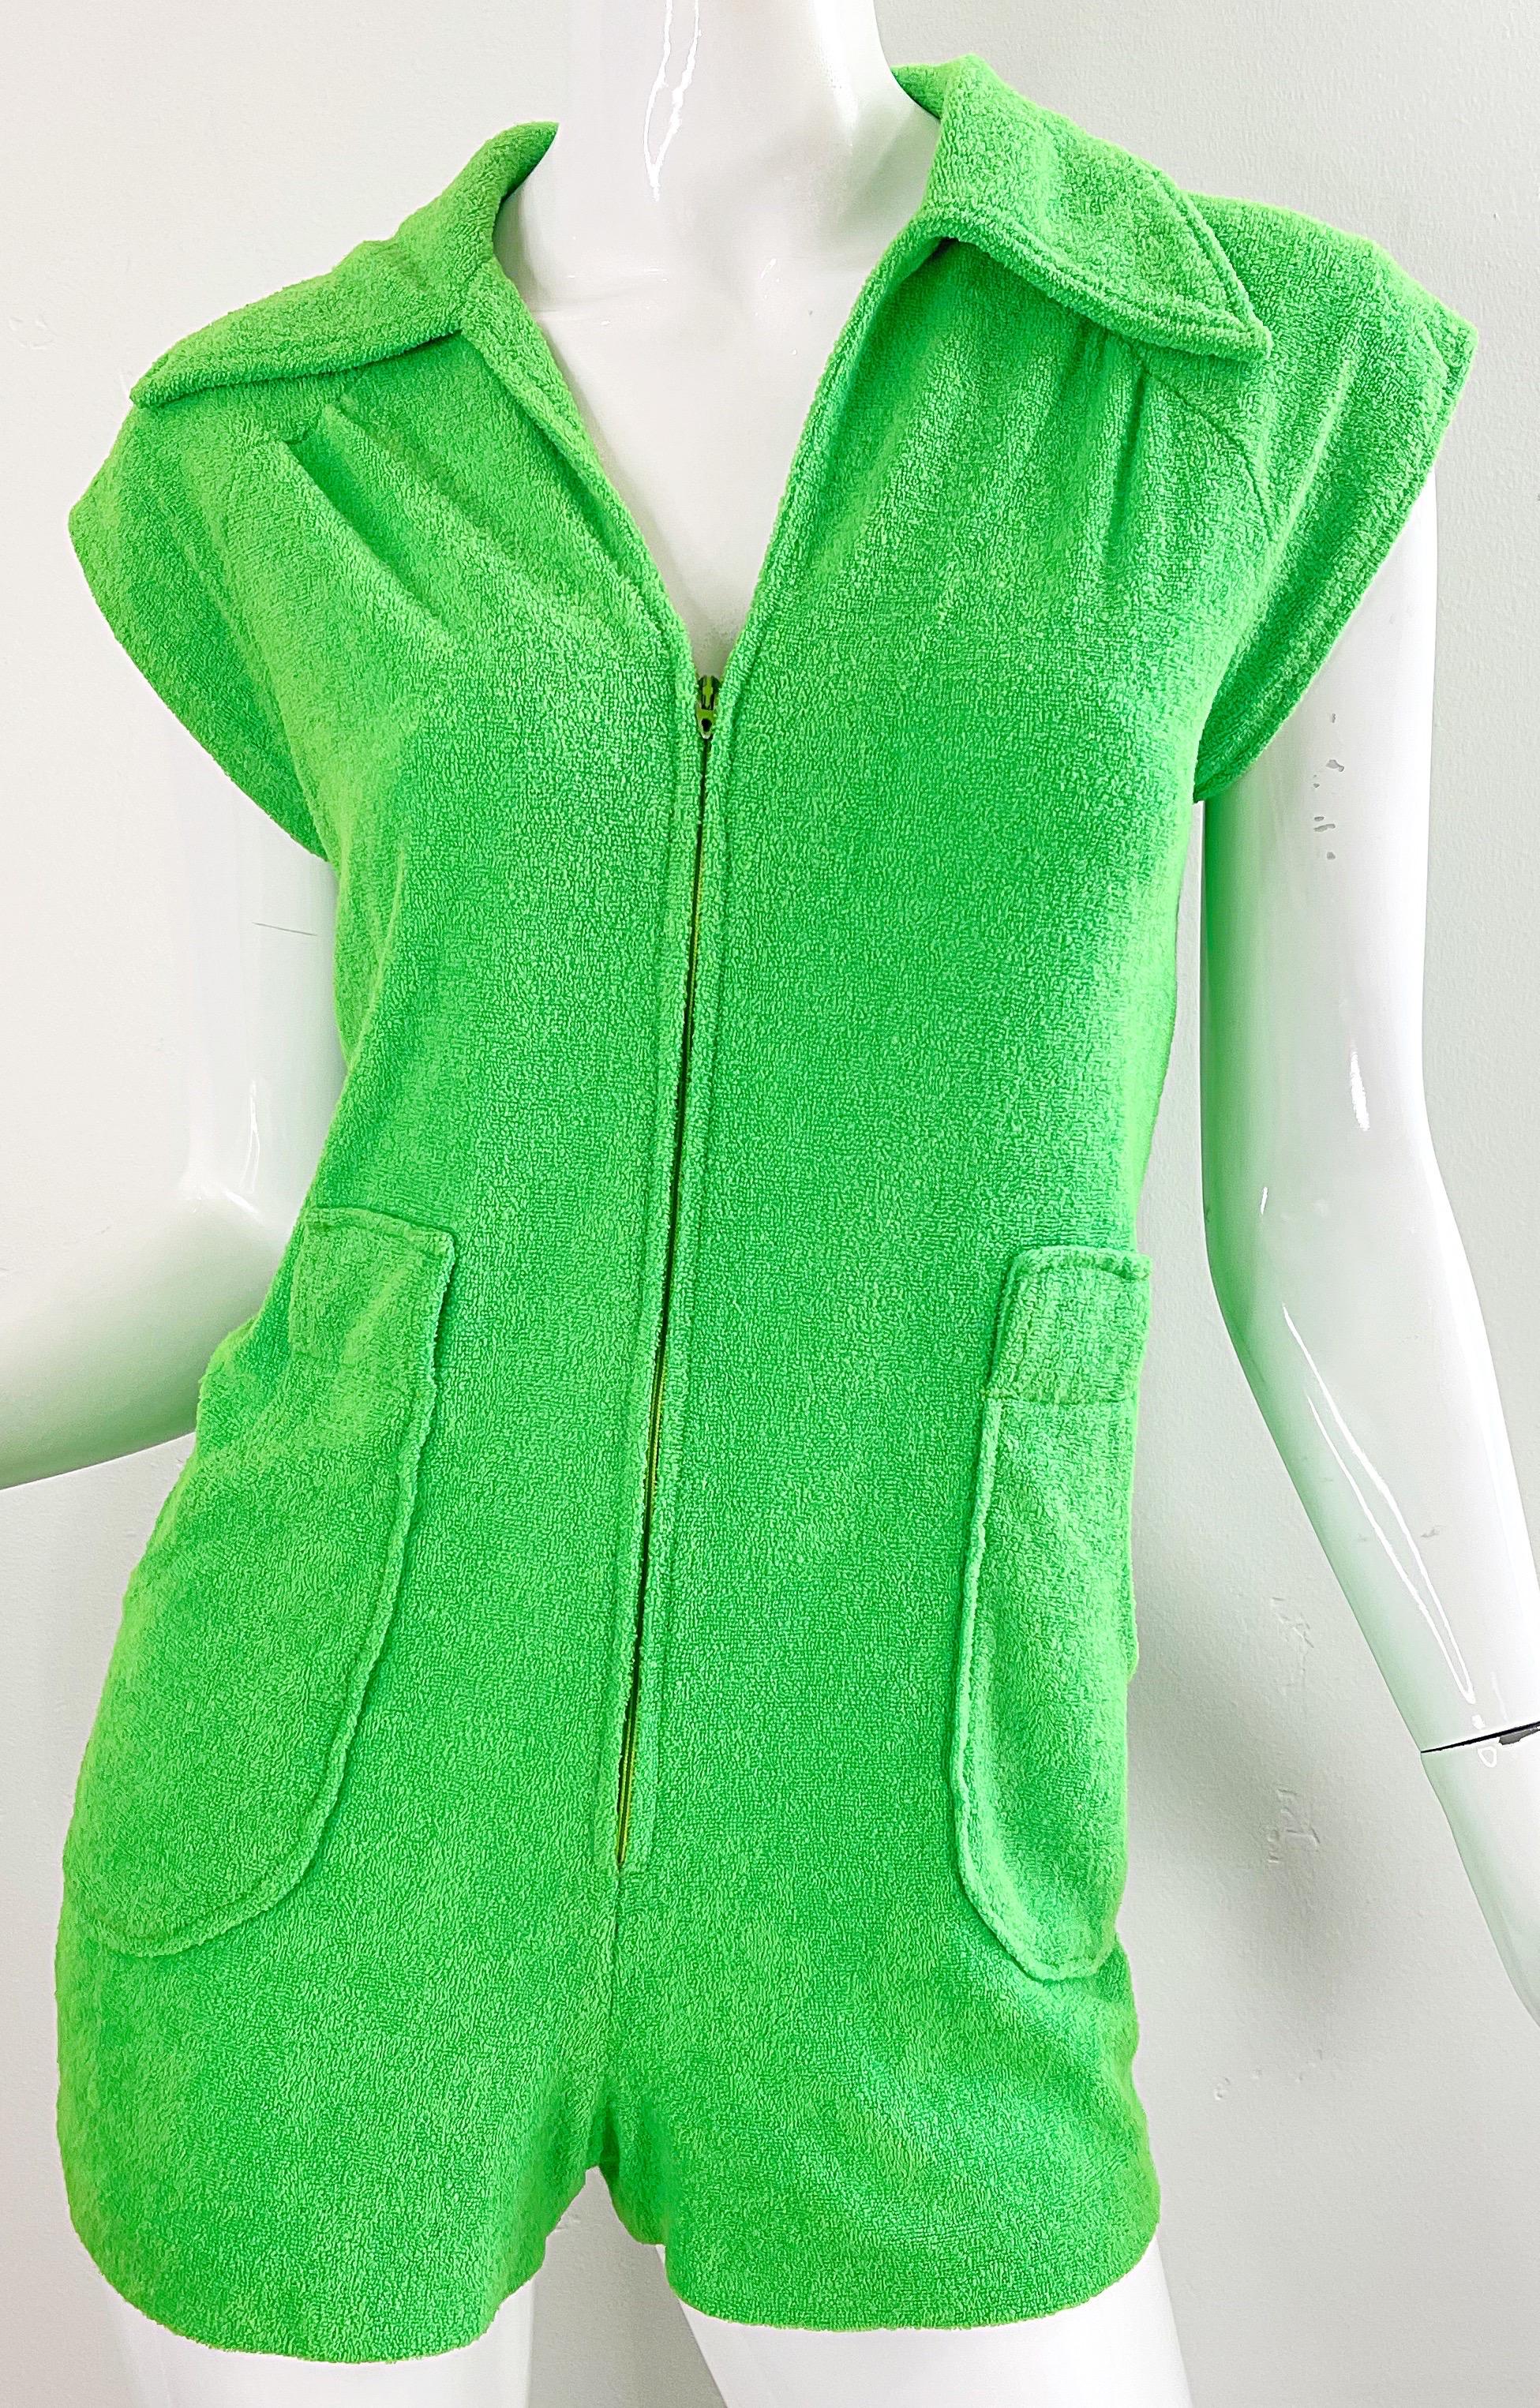 Women's Amazing 1970s Terrycloth Neon Green Romper Vintage 70s Shorts Jumpsuit For Sale